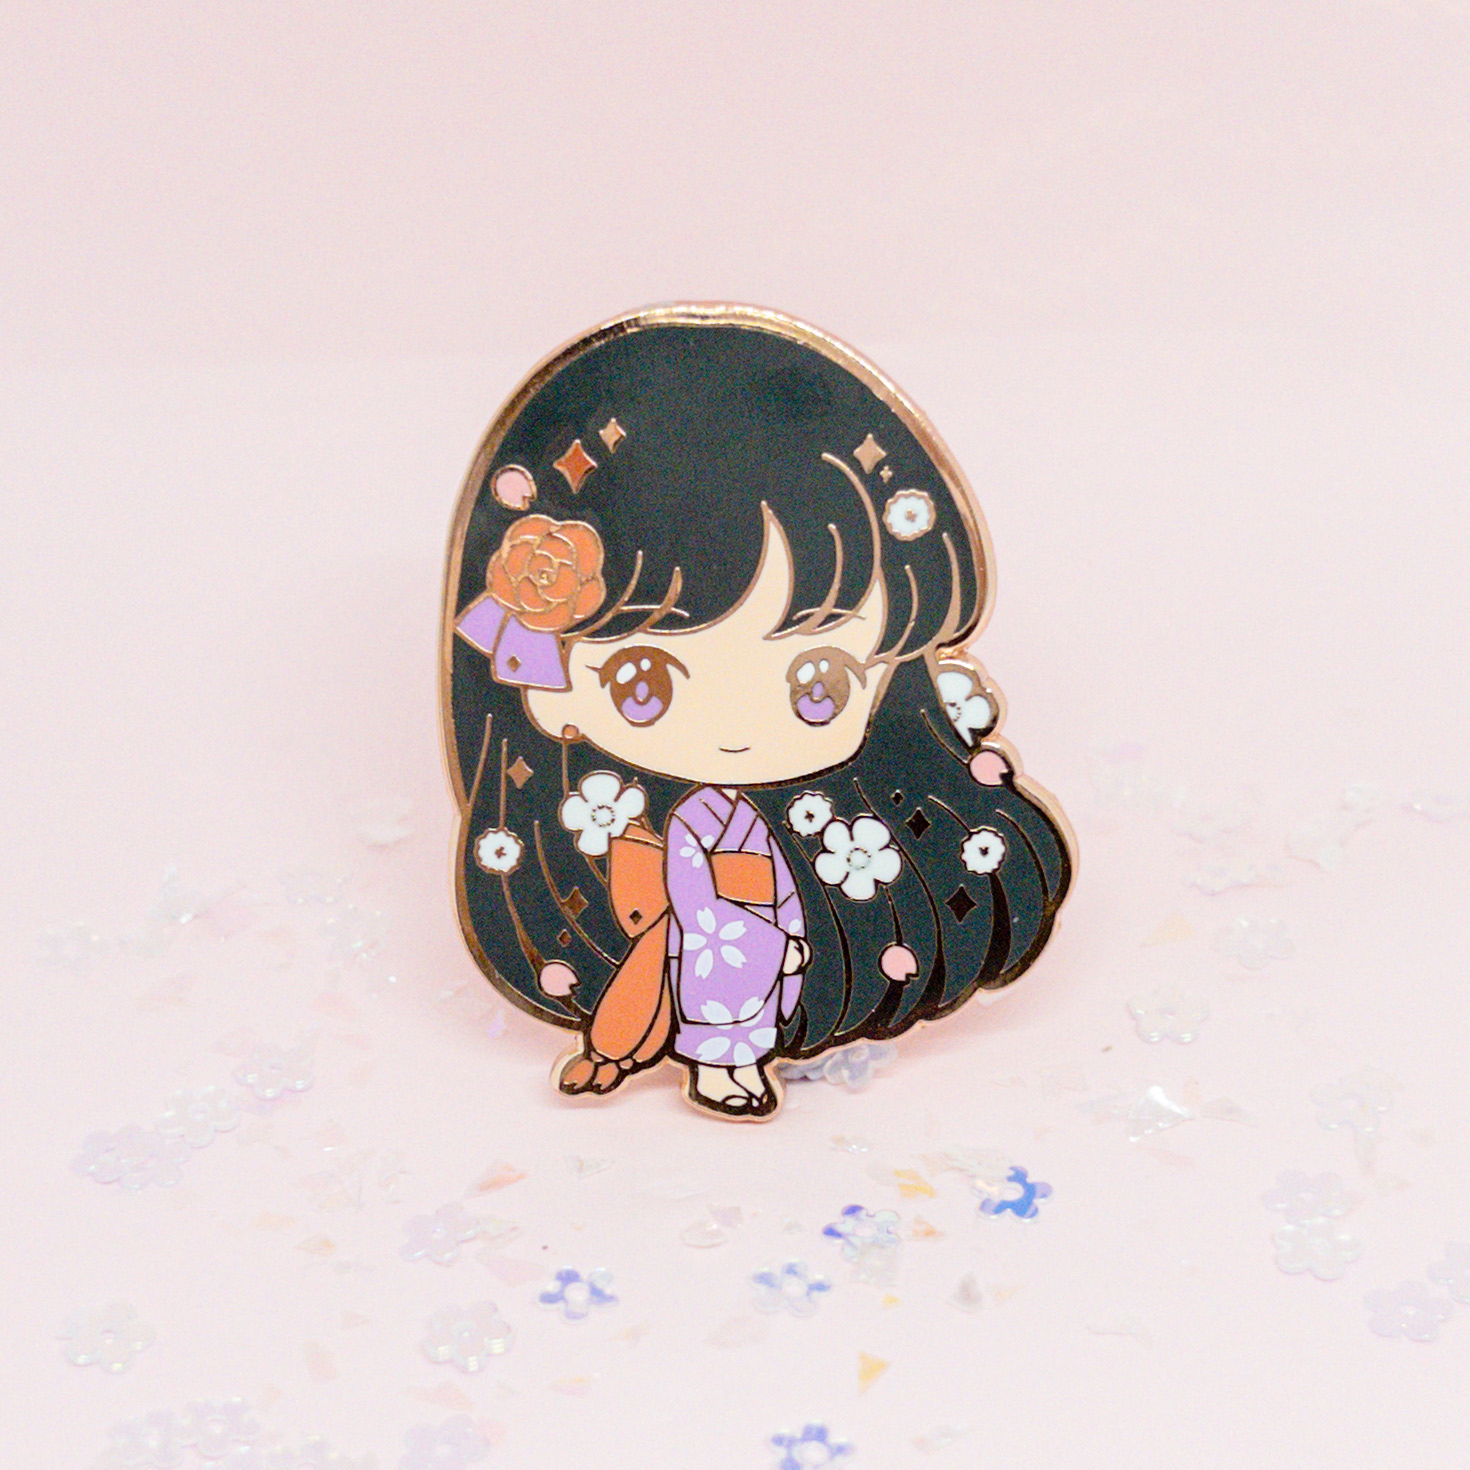 Japanese Fashion Cute Cartoon Anime Character Sailor Moon Pins Lapel Pin  Brooch Gifts for Women Girls Jewelry Accessory